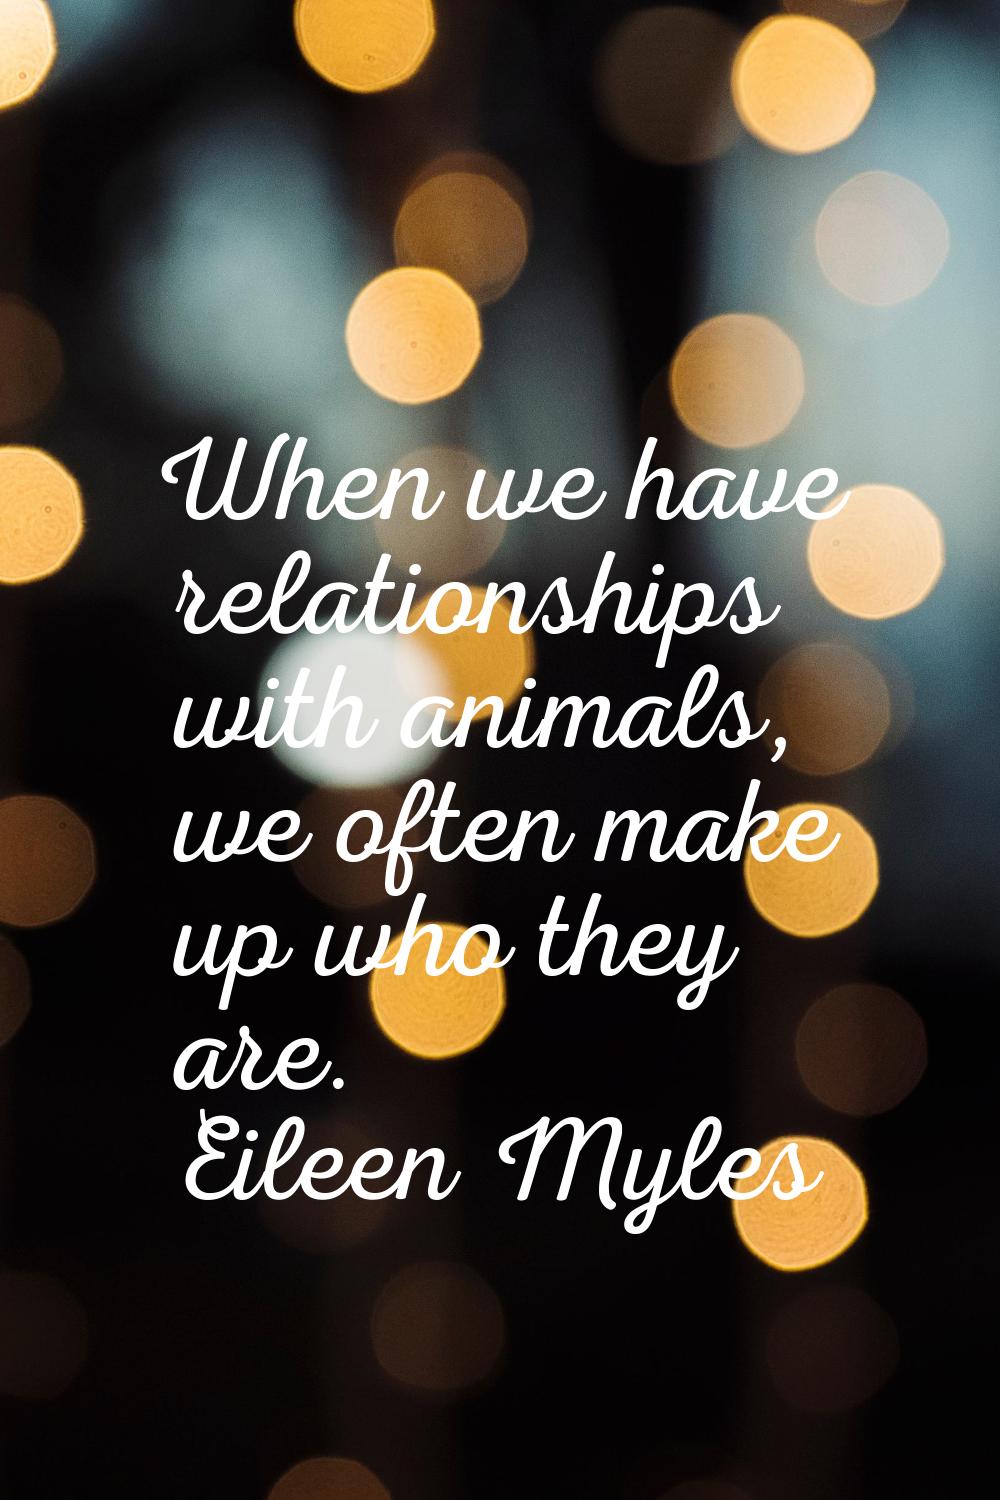 When we have relationships with animals, we often make up who they are.